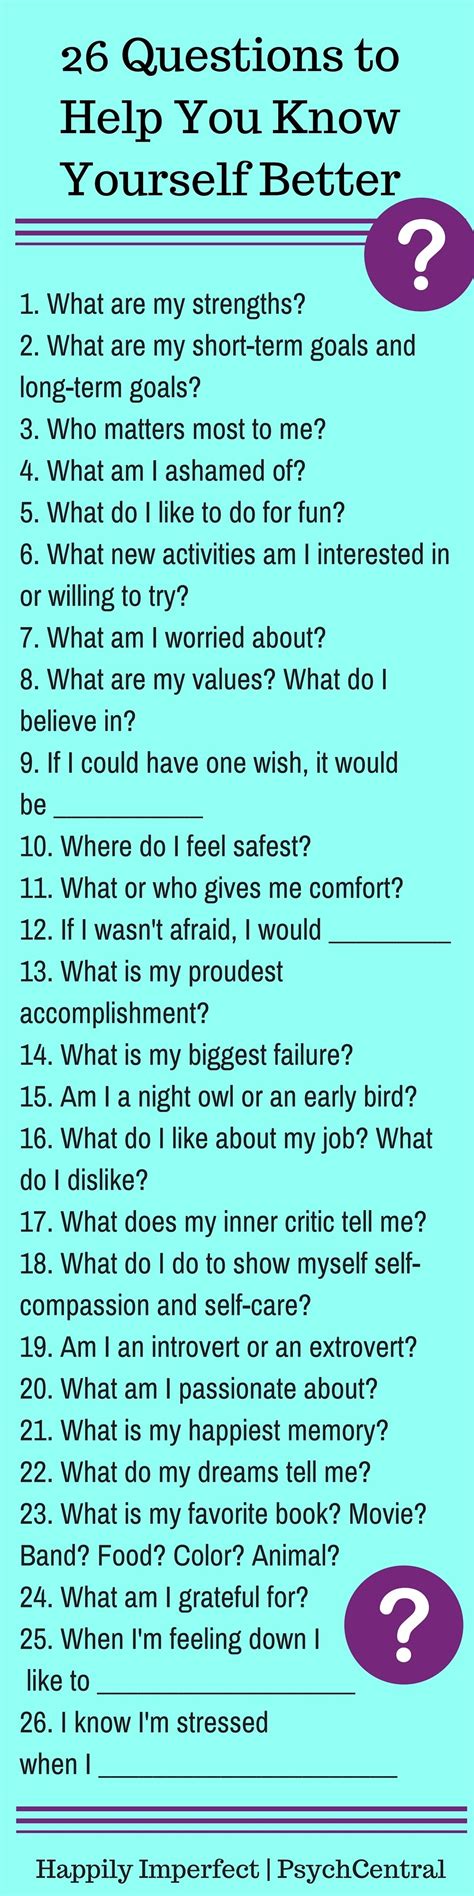 26 Questions to Help You Know Yourself Better Journal Prompts, Journal Ideas, Writing Prompts ...